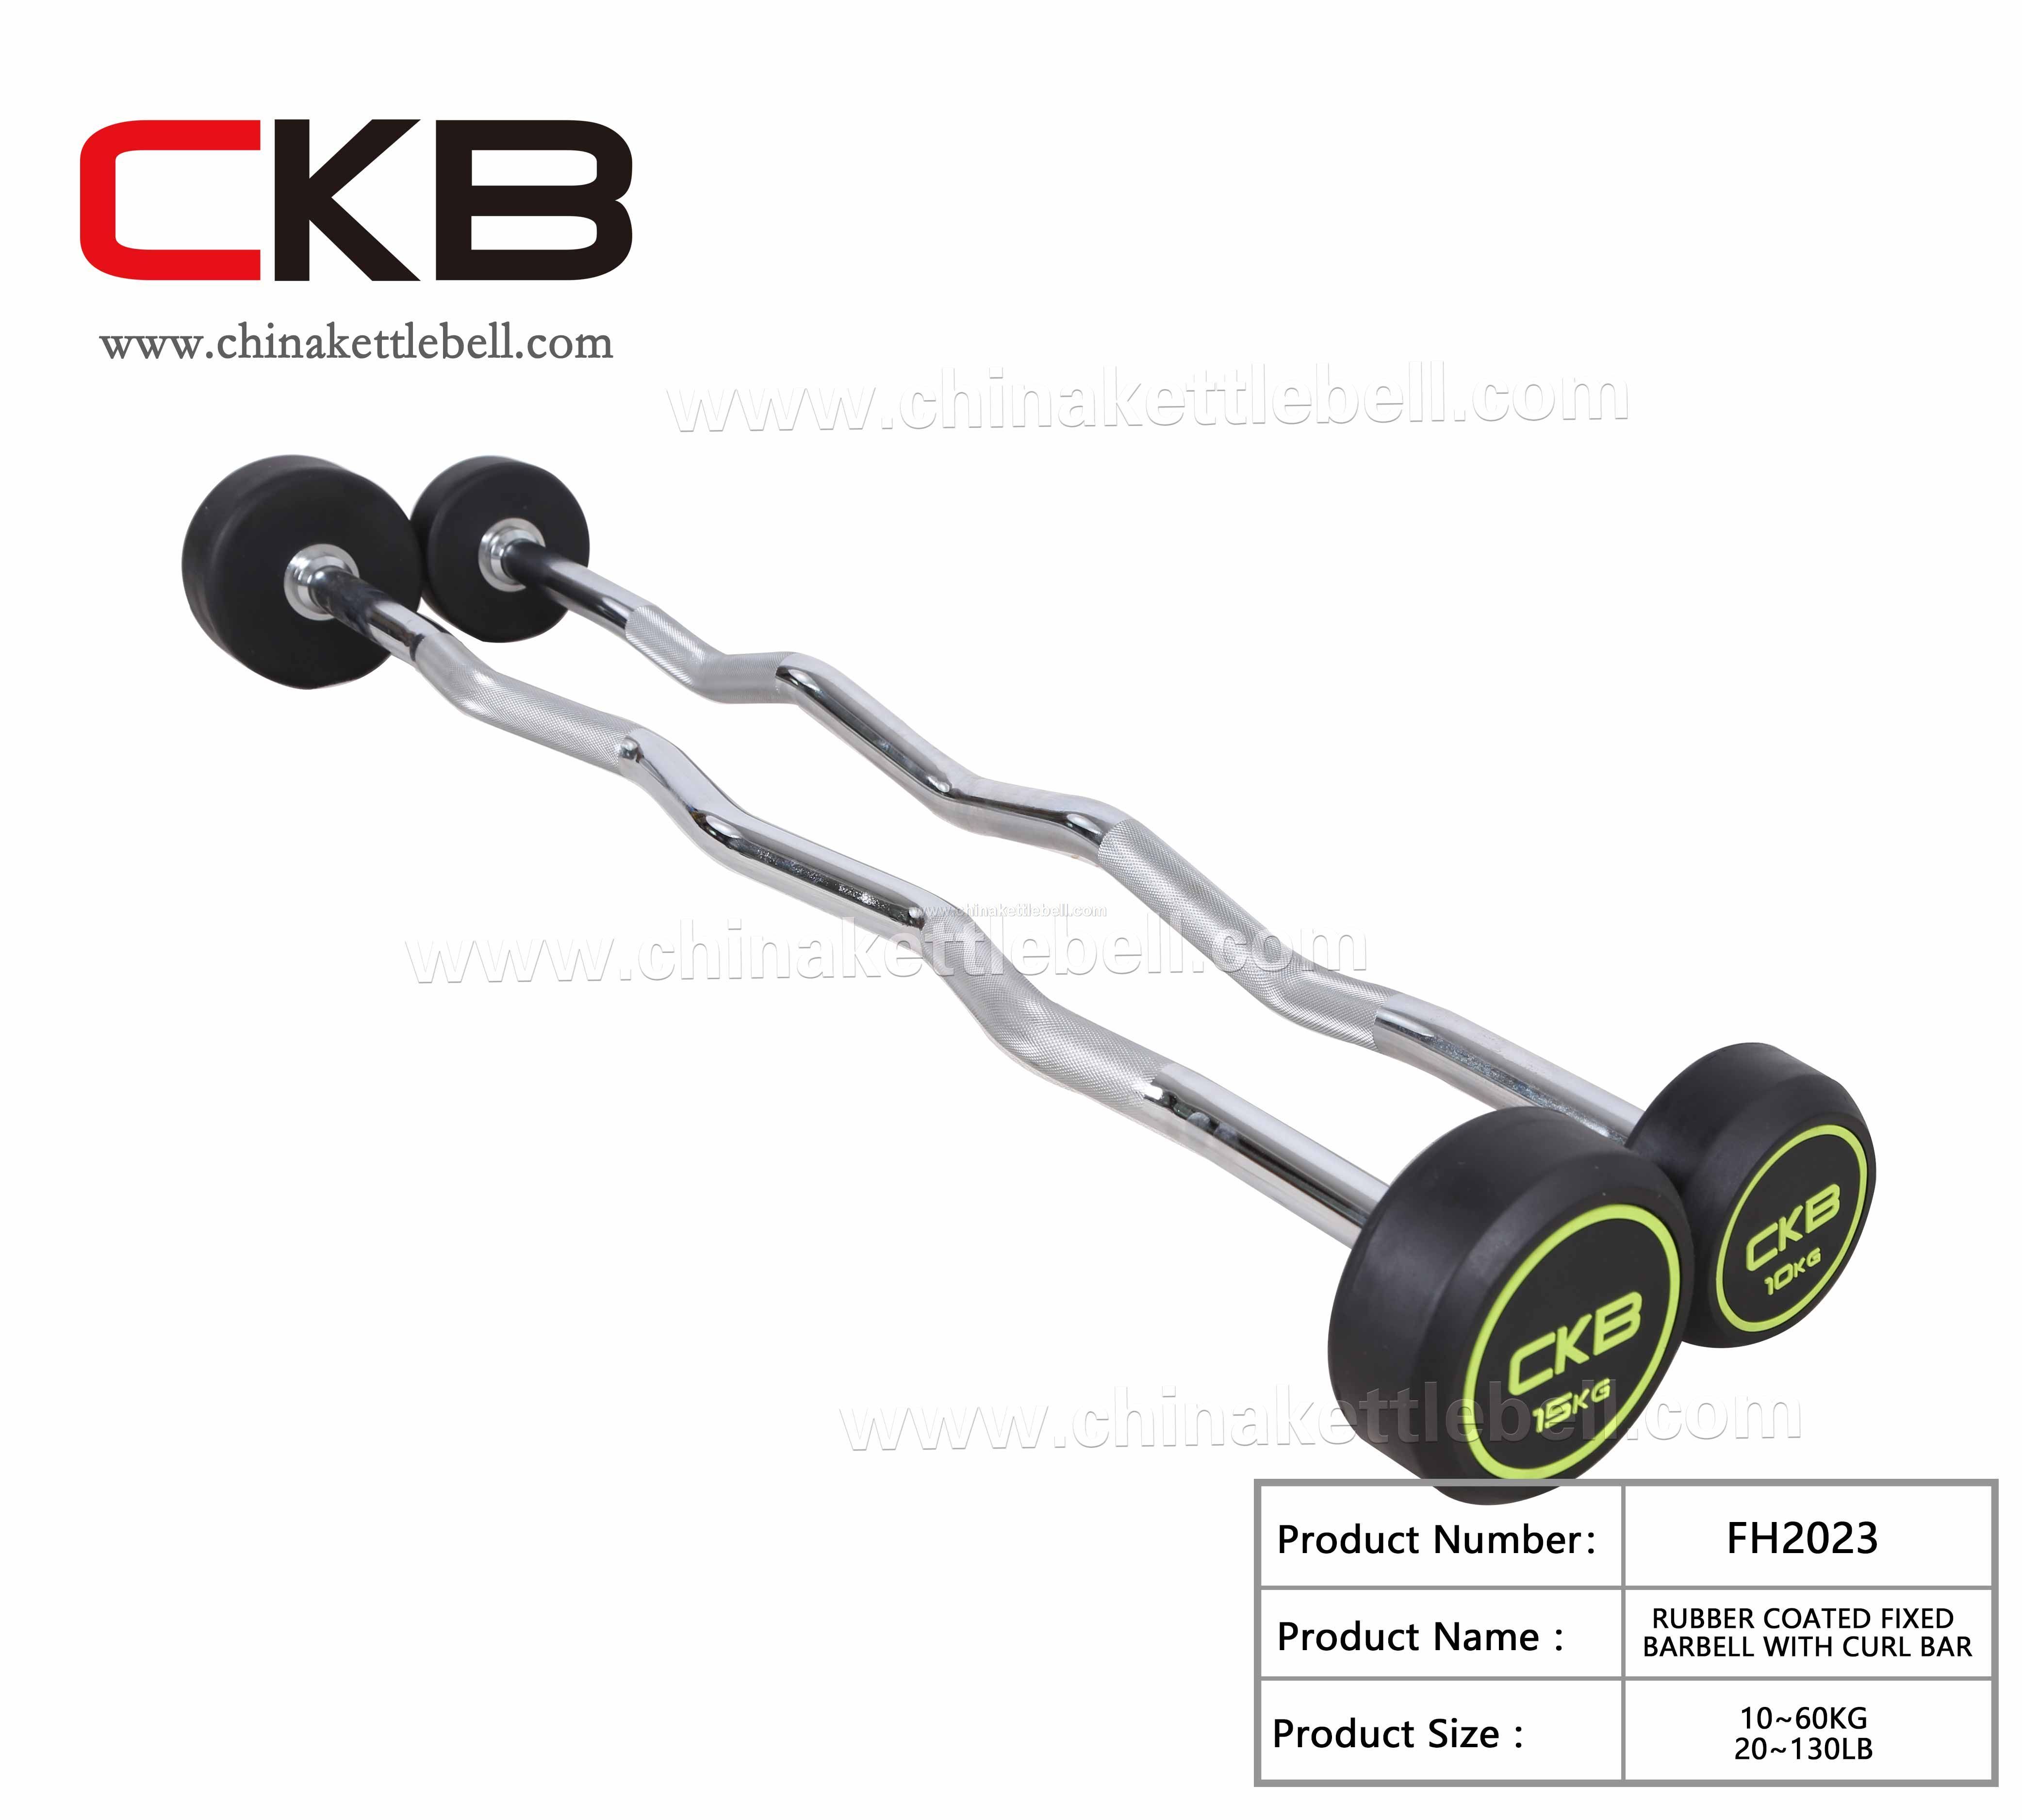 Rubber coated Fixed barbell with curl bar